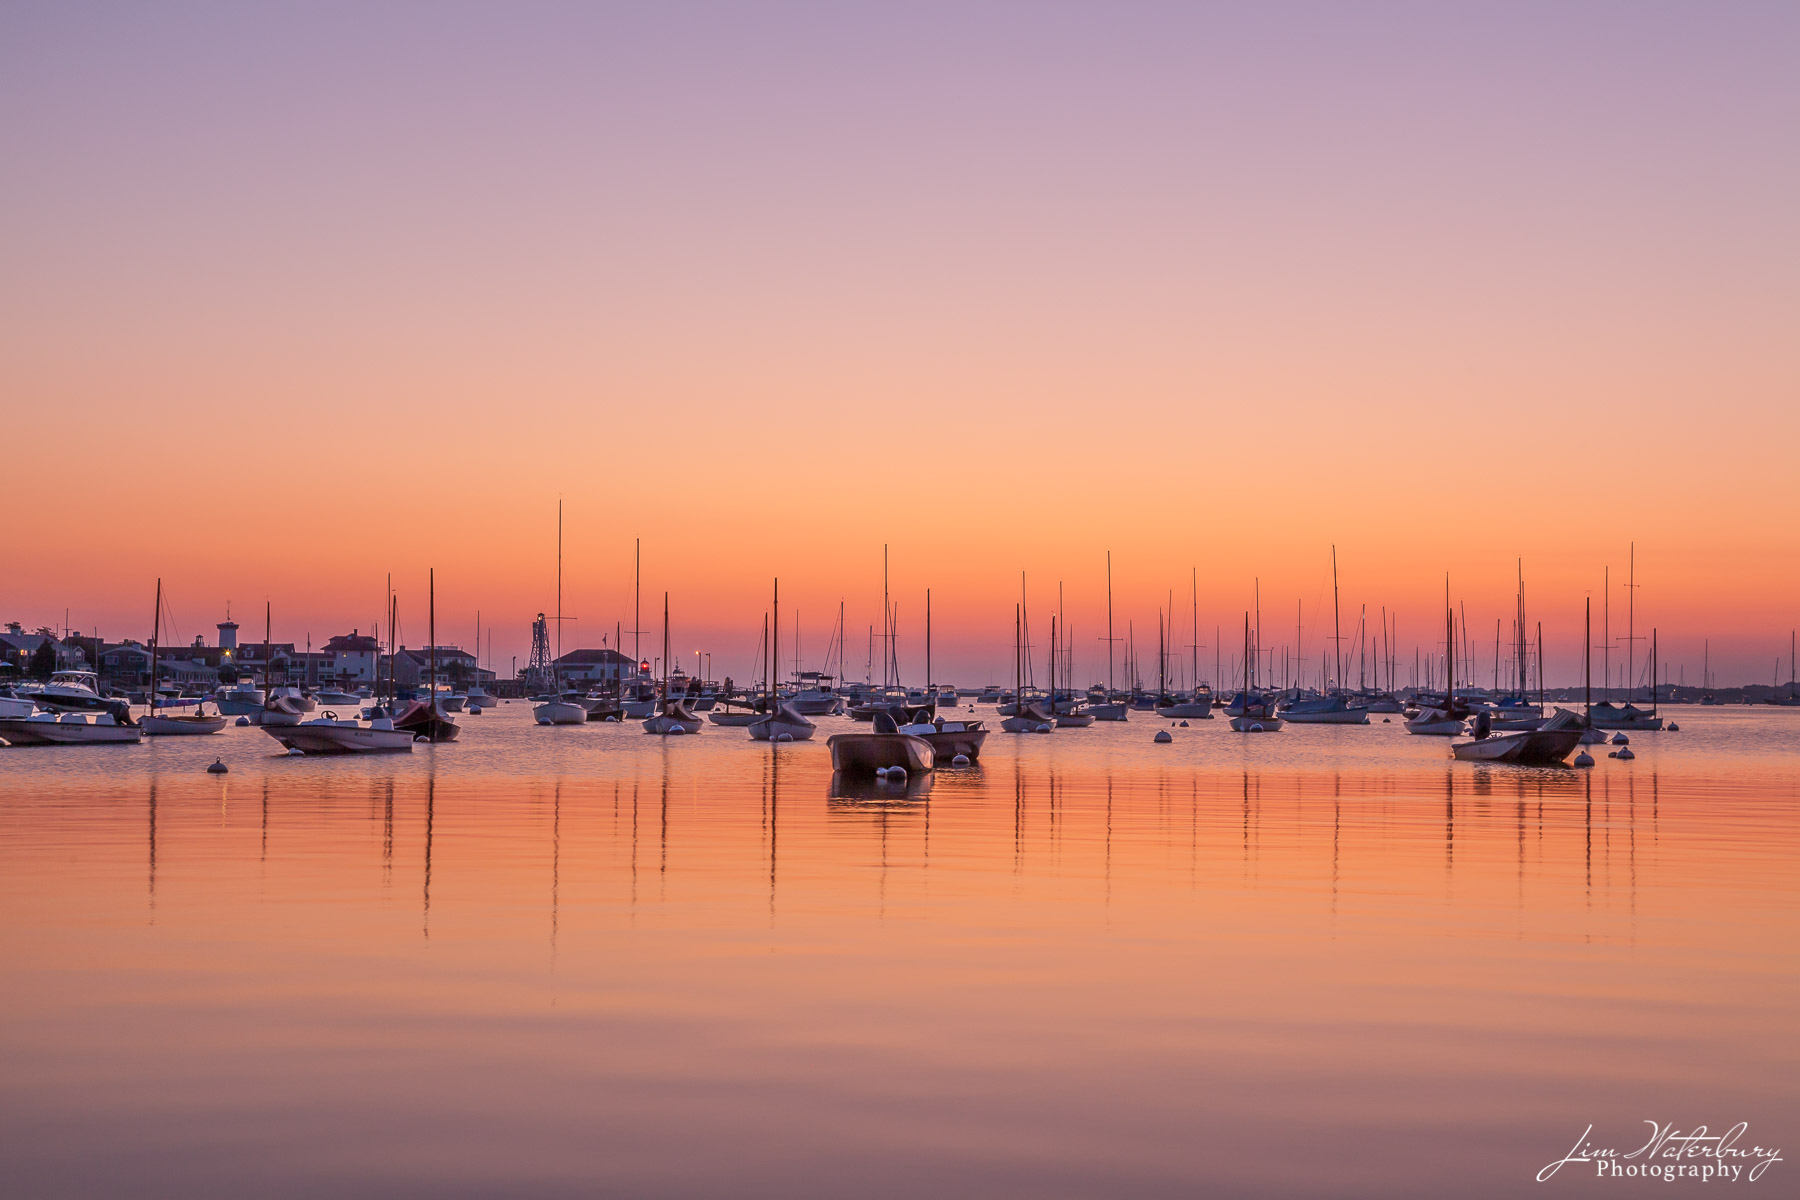 Boats at dawn in Nantucket Harbor under a pink and purple cloudless sky.